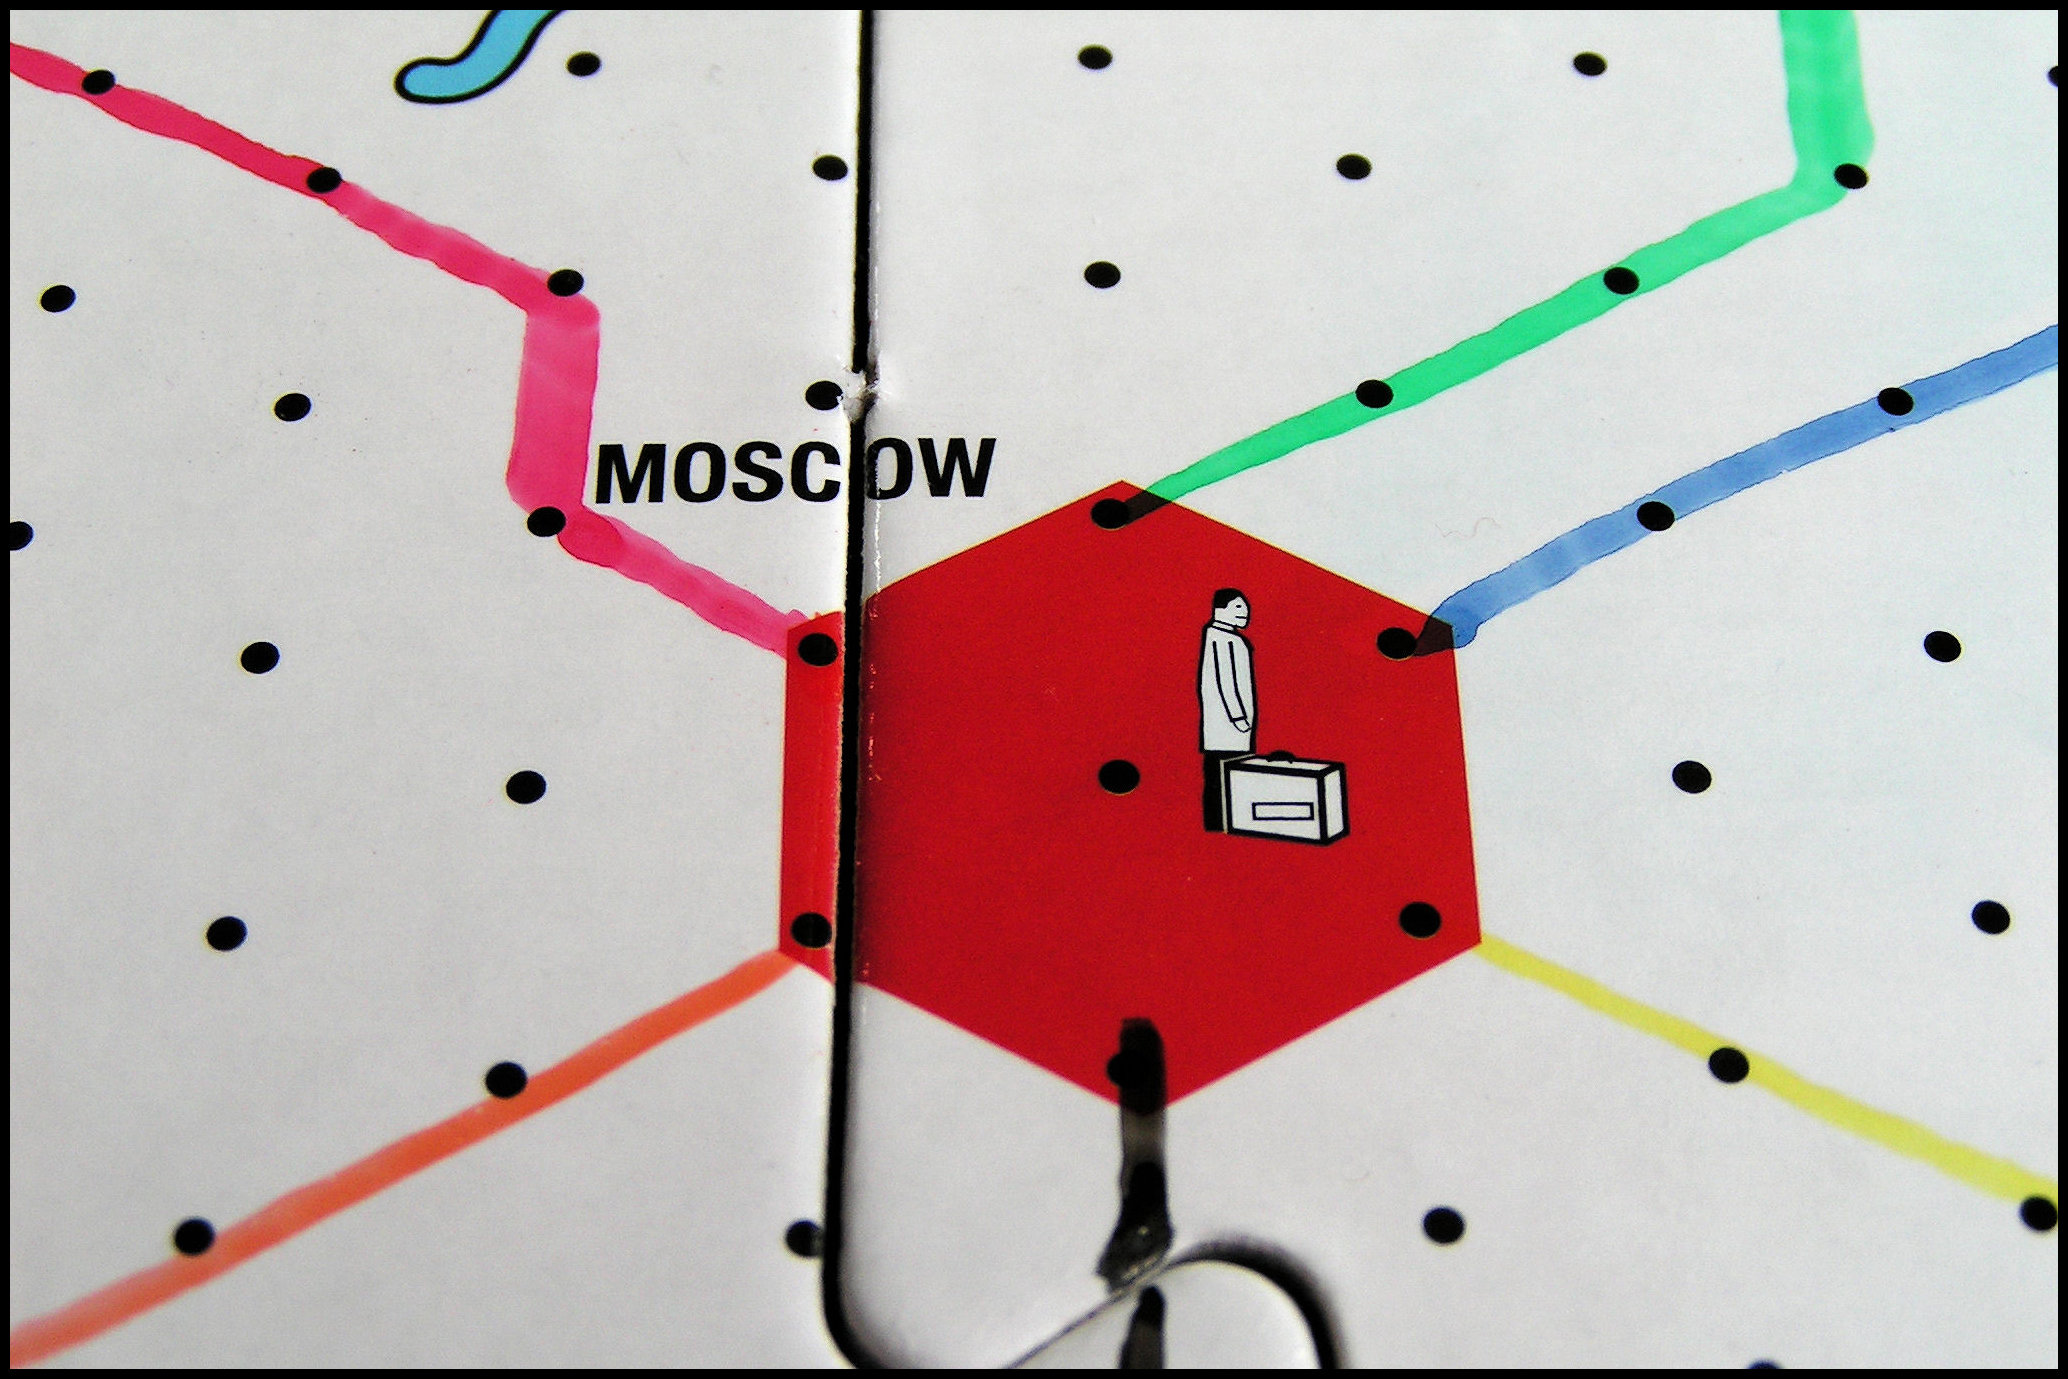 Russian Rails - Moscow Is Fully Connected